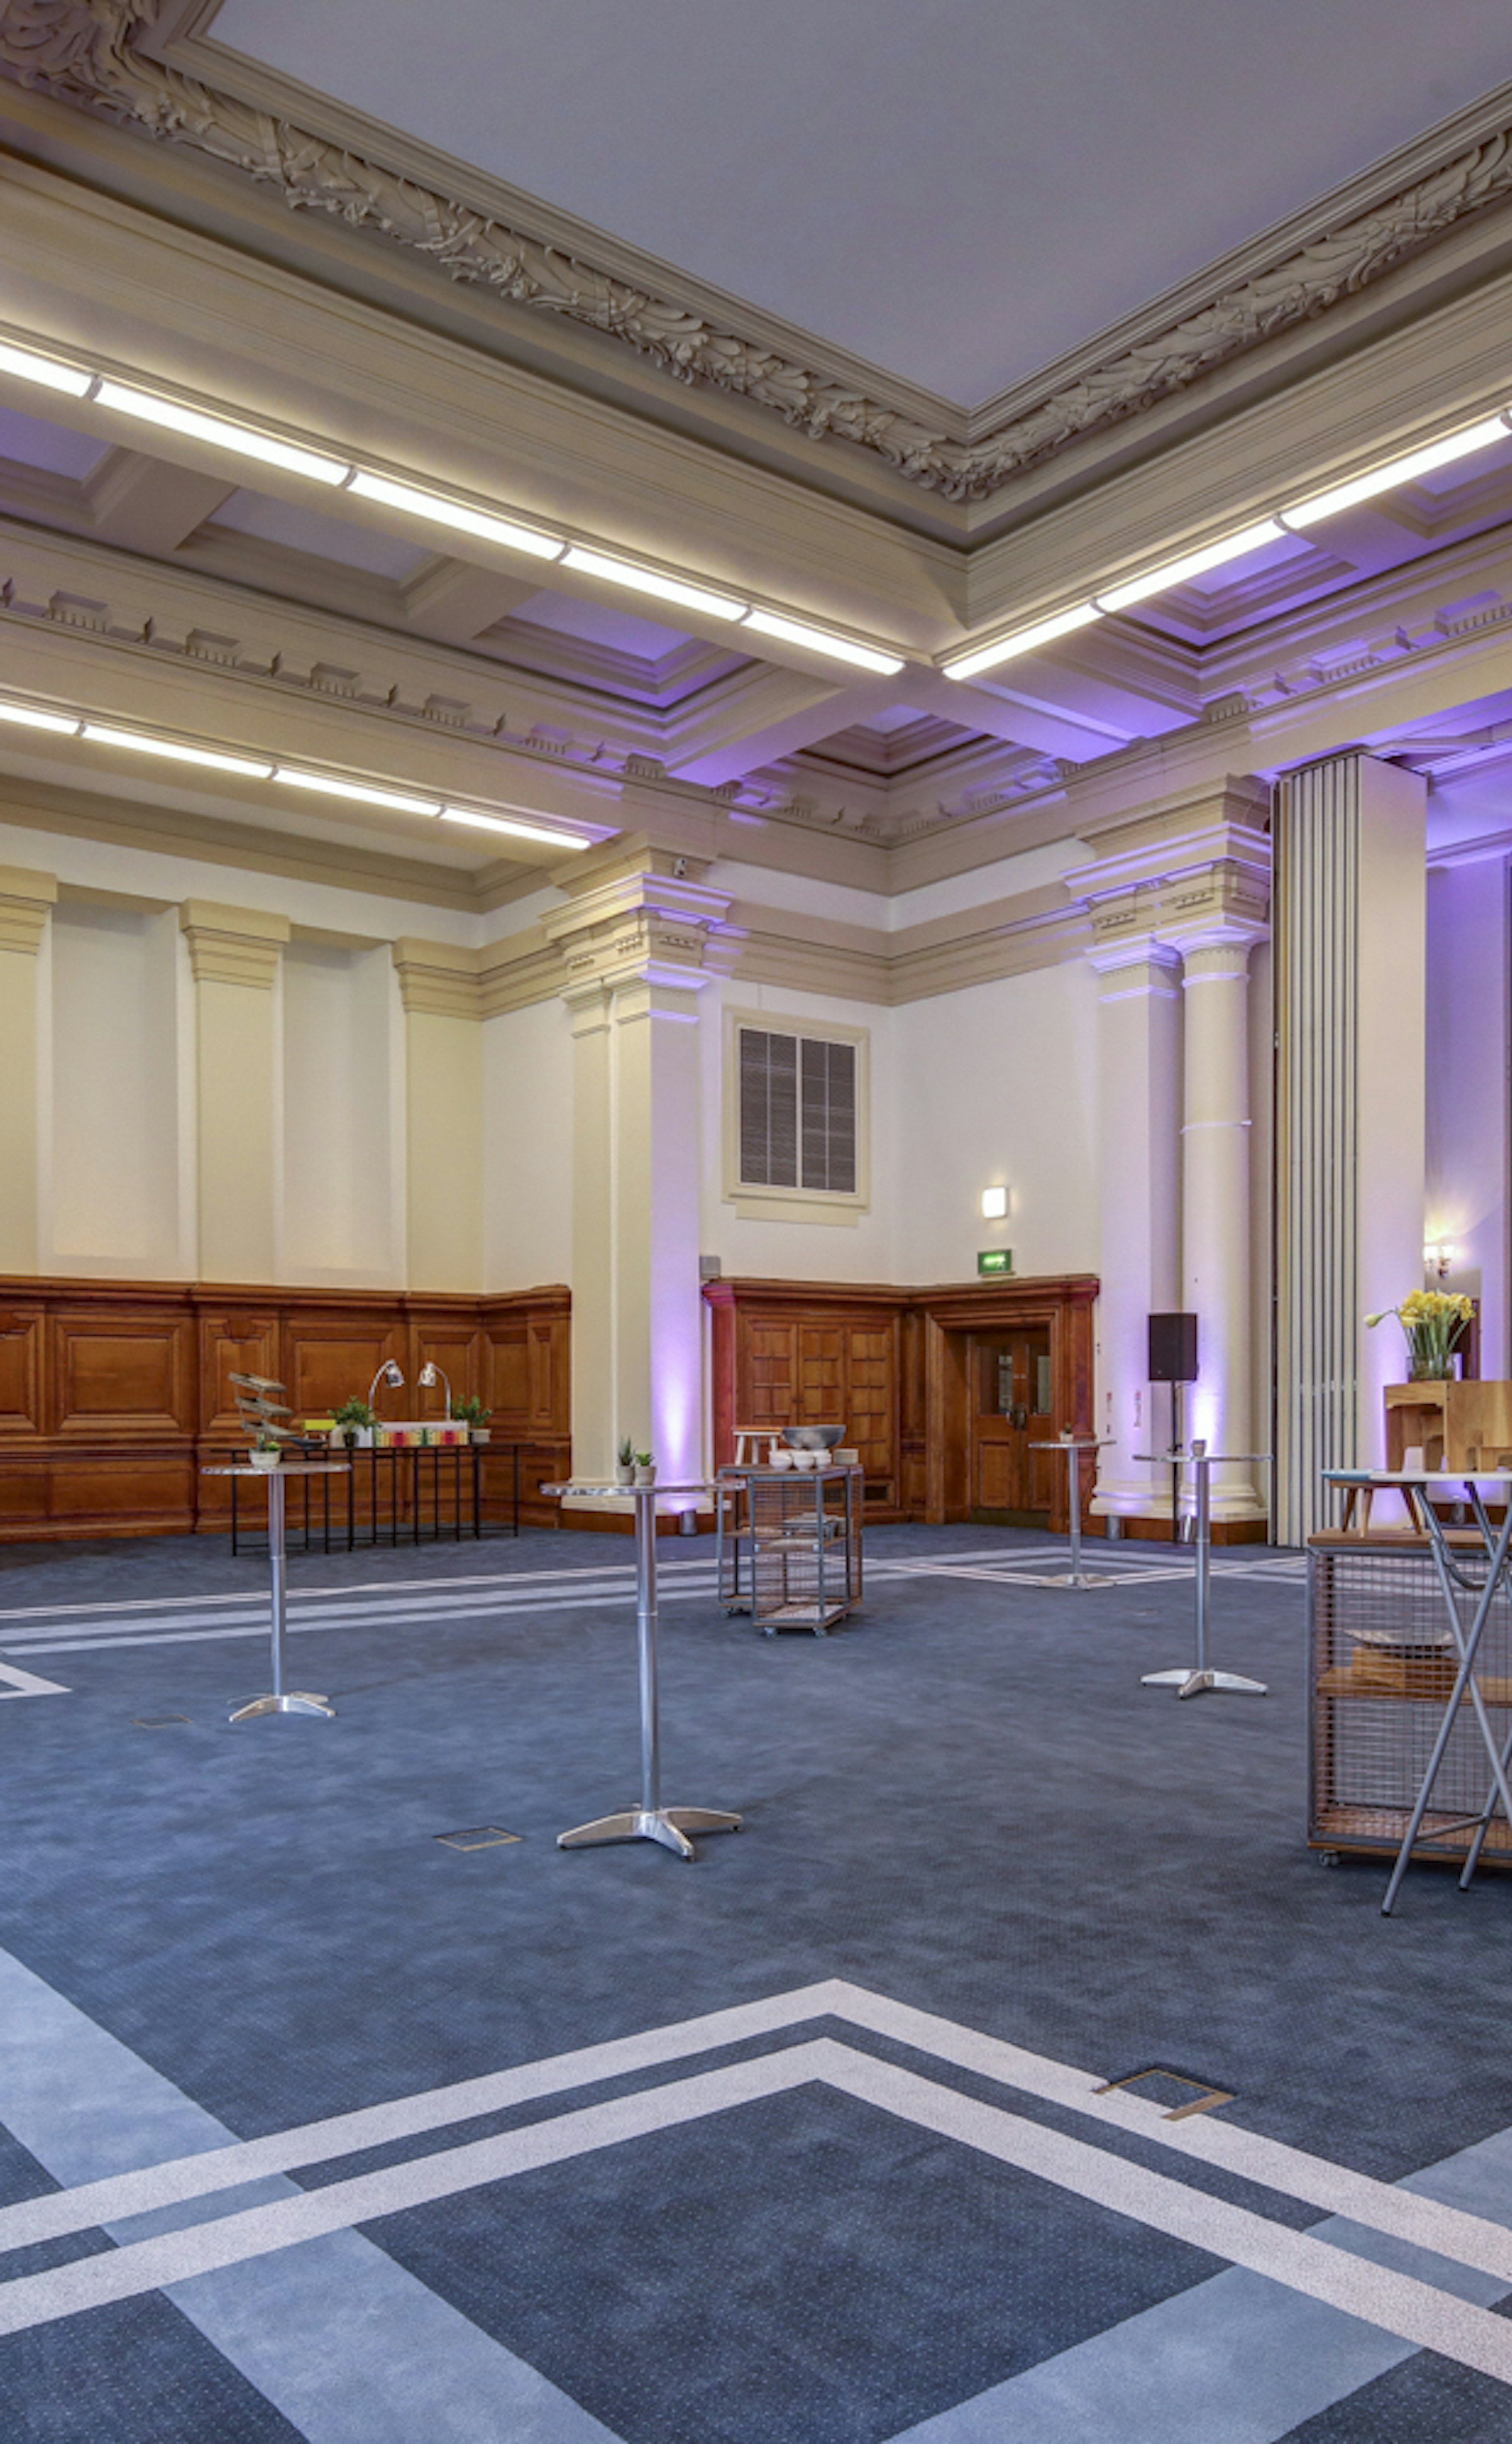 Exhibition Venues - Central Hall Westminster